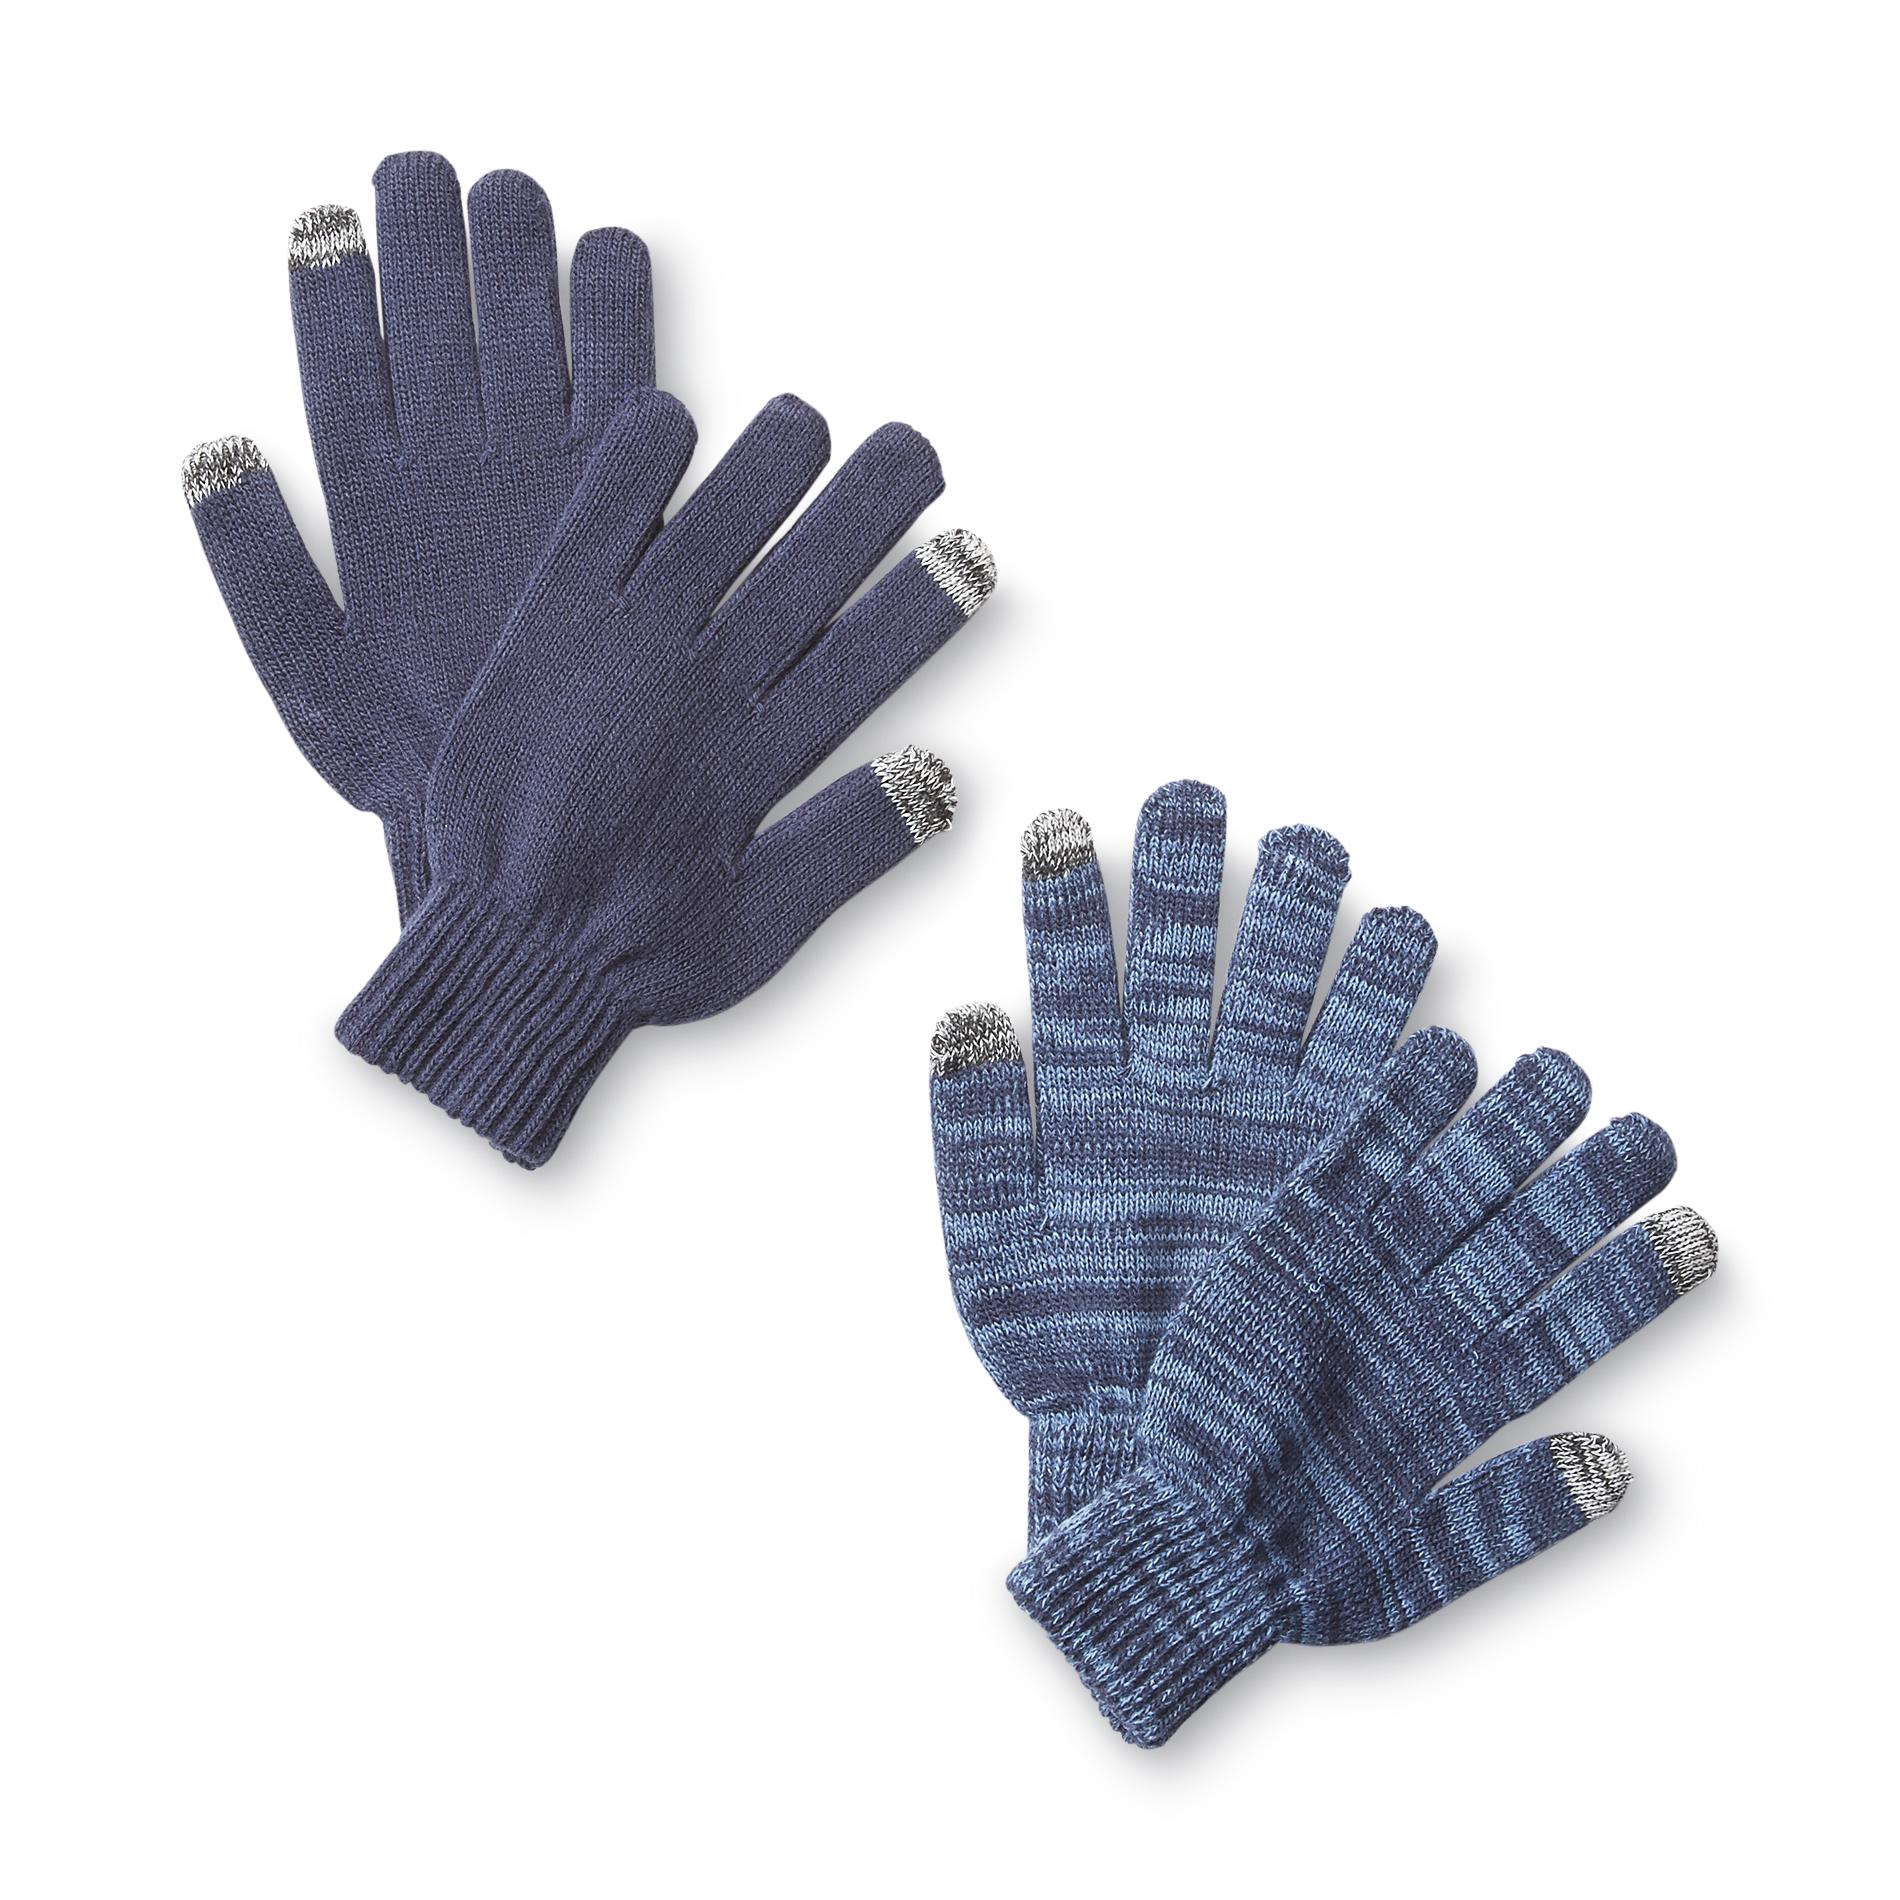 Attention Men's 2-Pairs Knit Liner Gloves - Striped & Solid